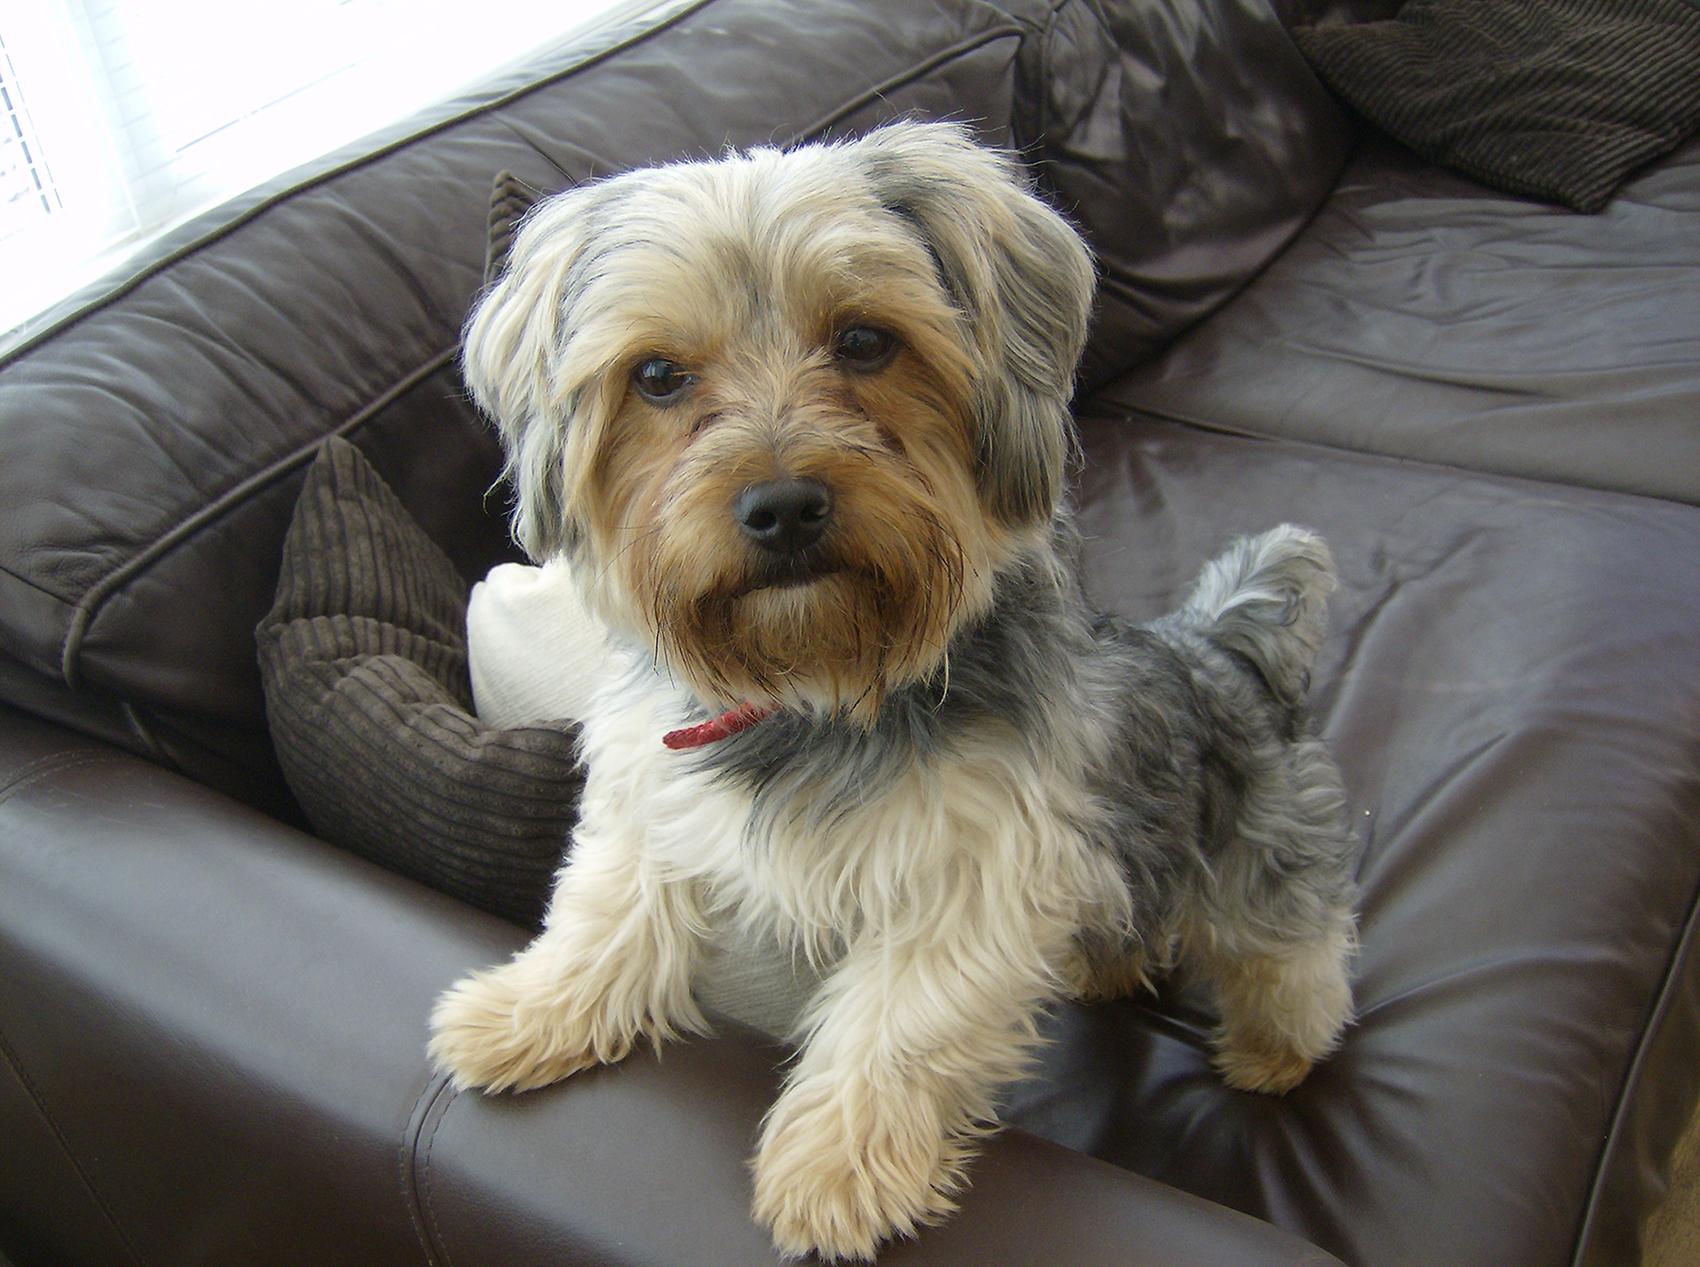 Nearly 9 percent of reported complaints about online pet scams involved Yorkshire terriers. (George2001hi / Wikipedia)